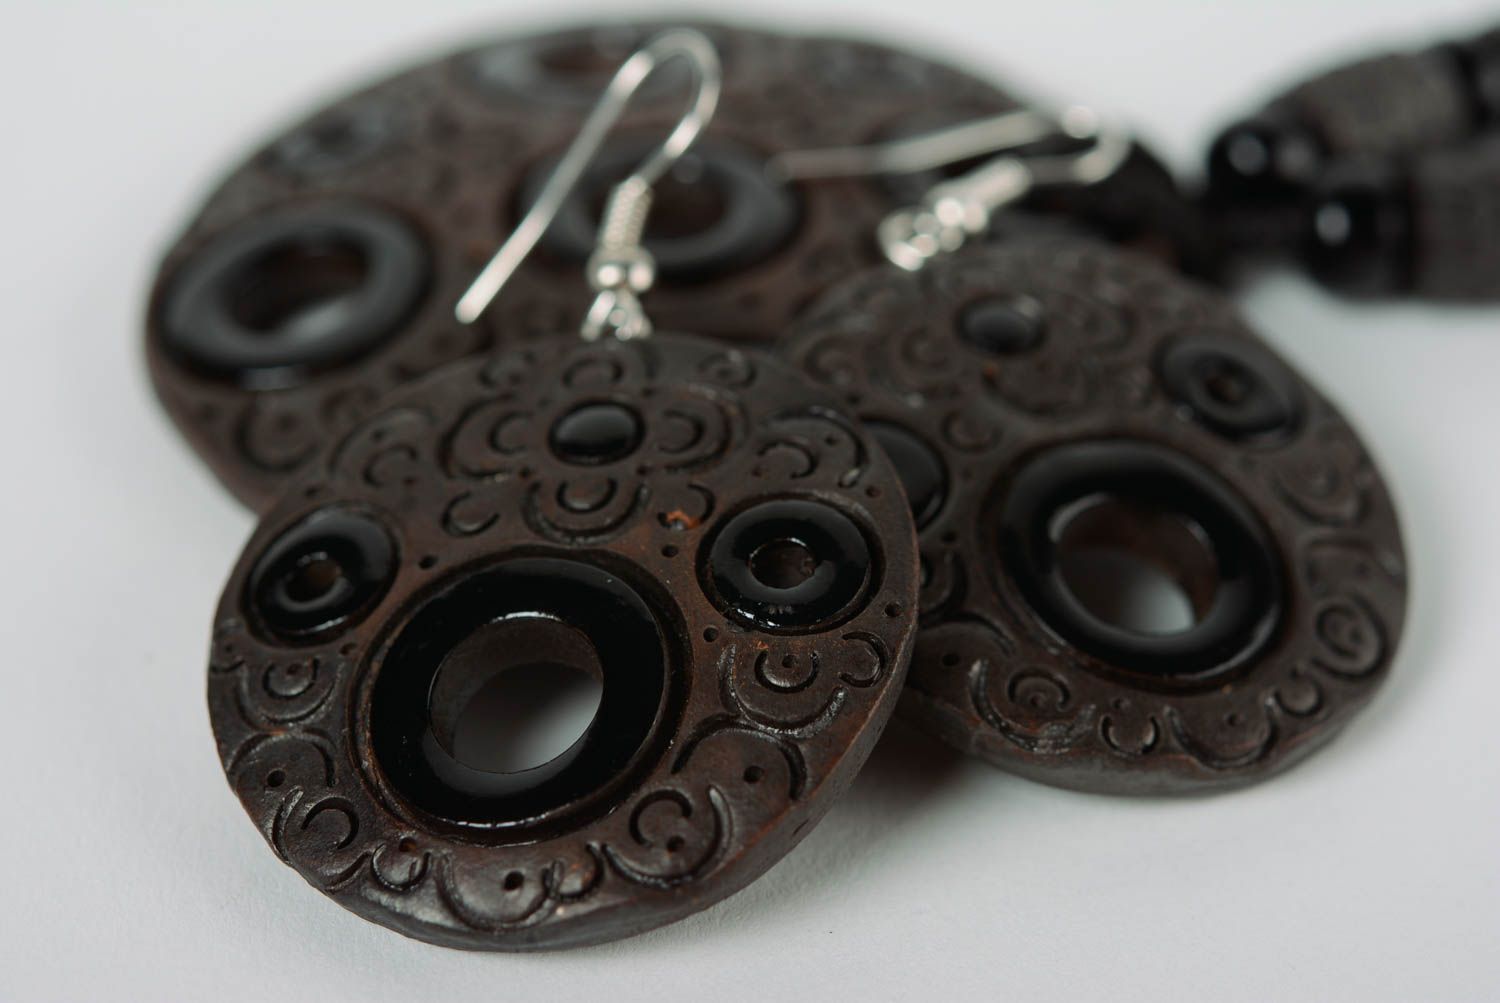 A set of handcrafted black ceramic earrings and necklace made of clay with colored enamel paintings photo 3